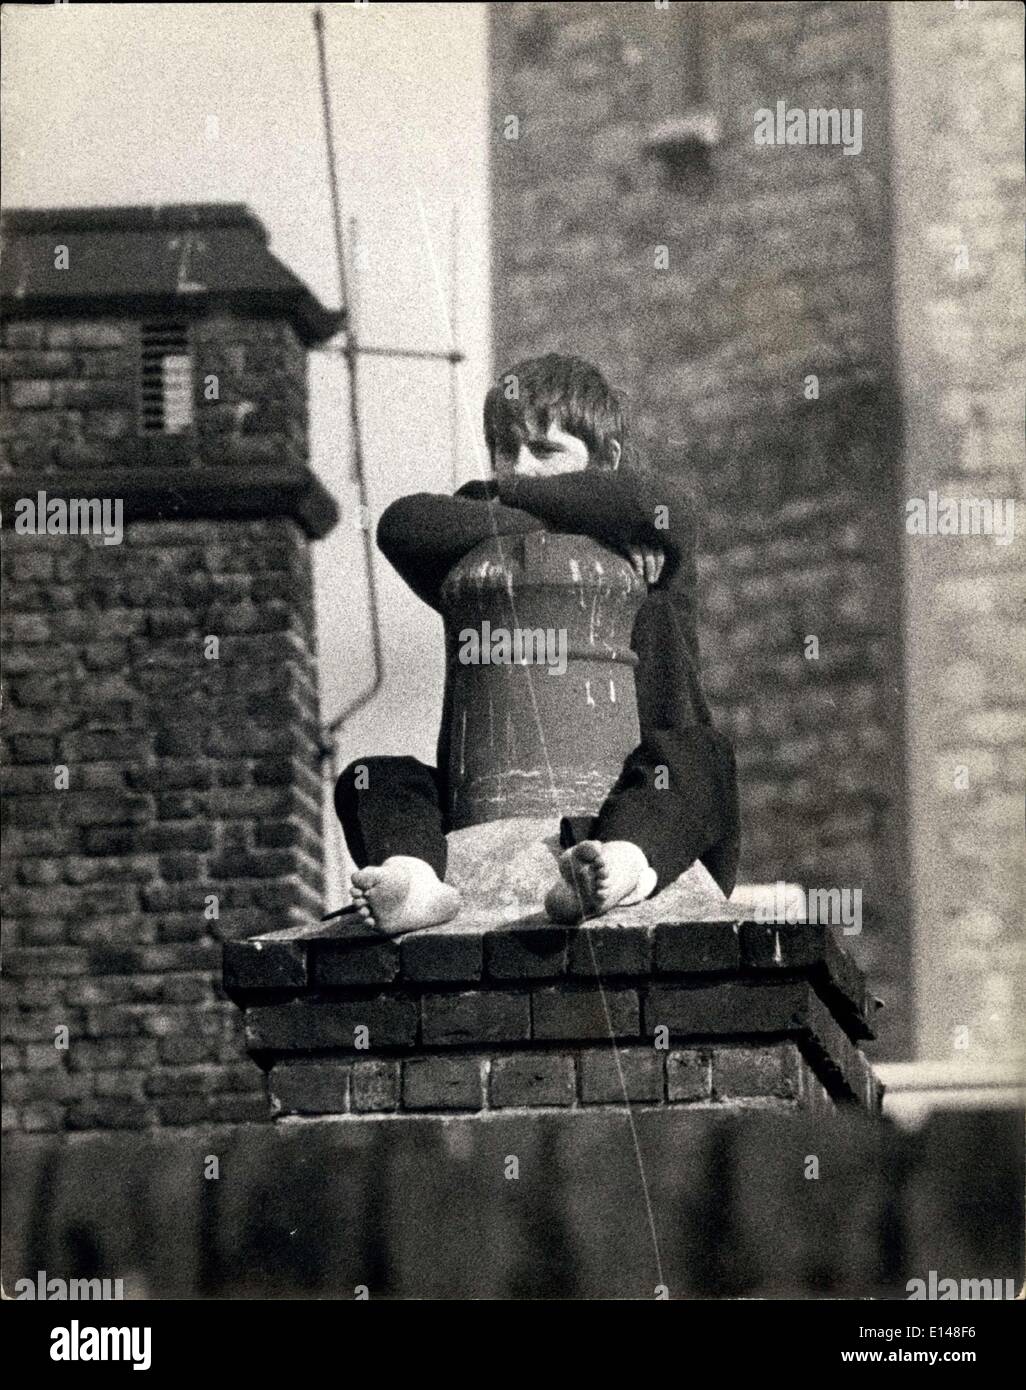 Apr. 17, 2012 - GIRL PRISONER AT HOLLOWAY PRISON STAGES HER SECOND ROOFTOP PROTEST: Girl prisoner, Pat Breslin, 18, who is serving a sentence of nine months at Holloway Prison for shoplifting, staged her second protest in a week yesterday. Today, after staying overnight perched on the roof beside a chimney stack, she was still refusing to be coaxed down by prison officers. Last week, the girl spent 12 hours on the same roof in a protest about food and conditions. This time she is protesting because she sees that she is being moved to a top security wing at the prison Stock Photo